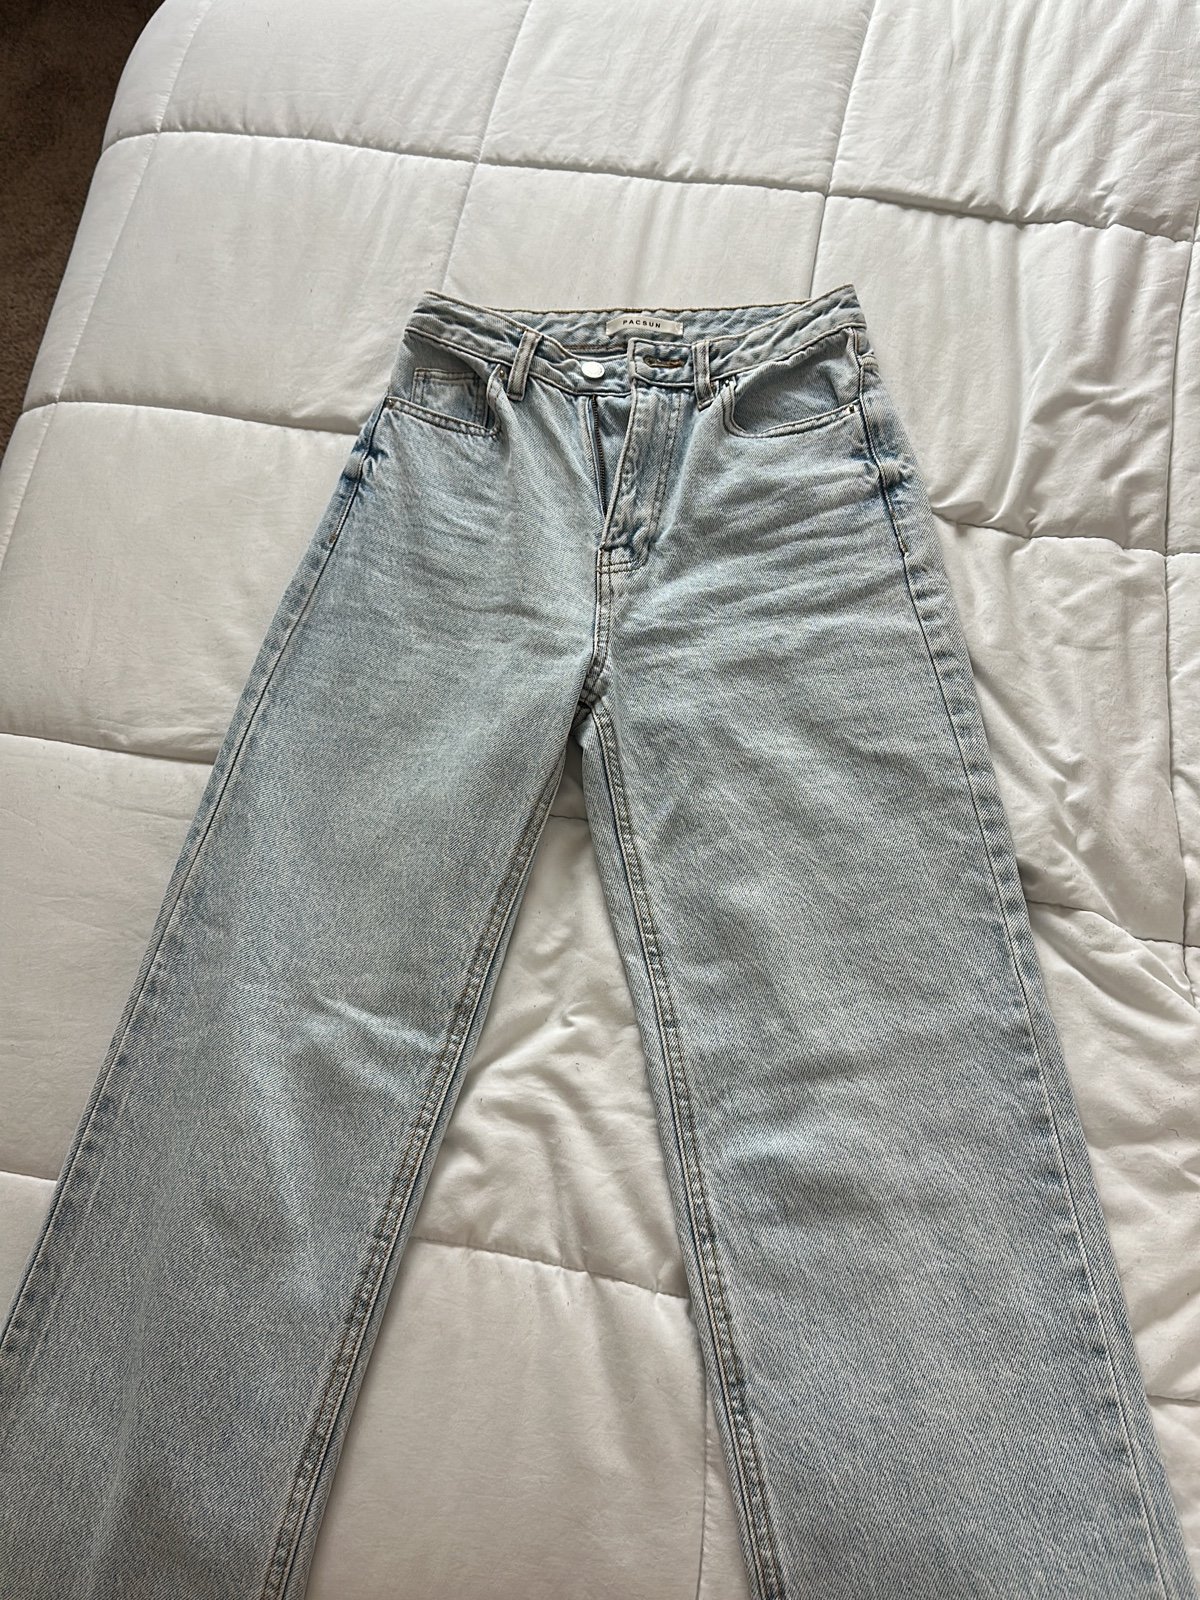 Custom Pacsun Jeans K6mYHXaVd all for you